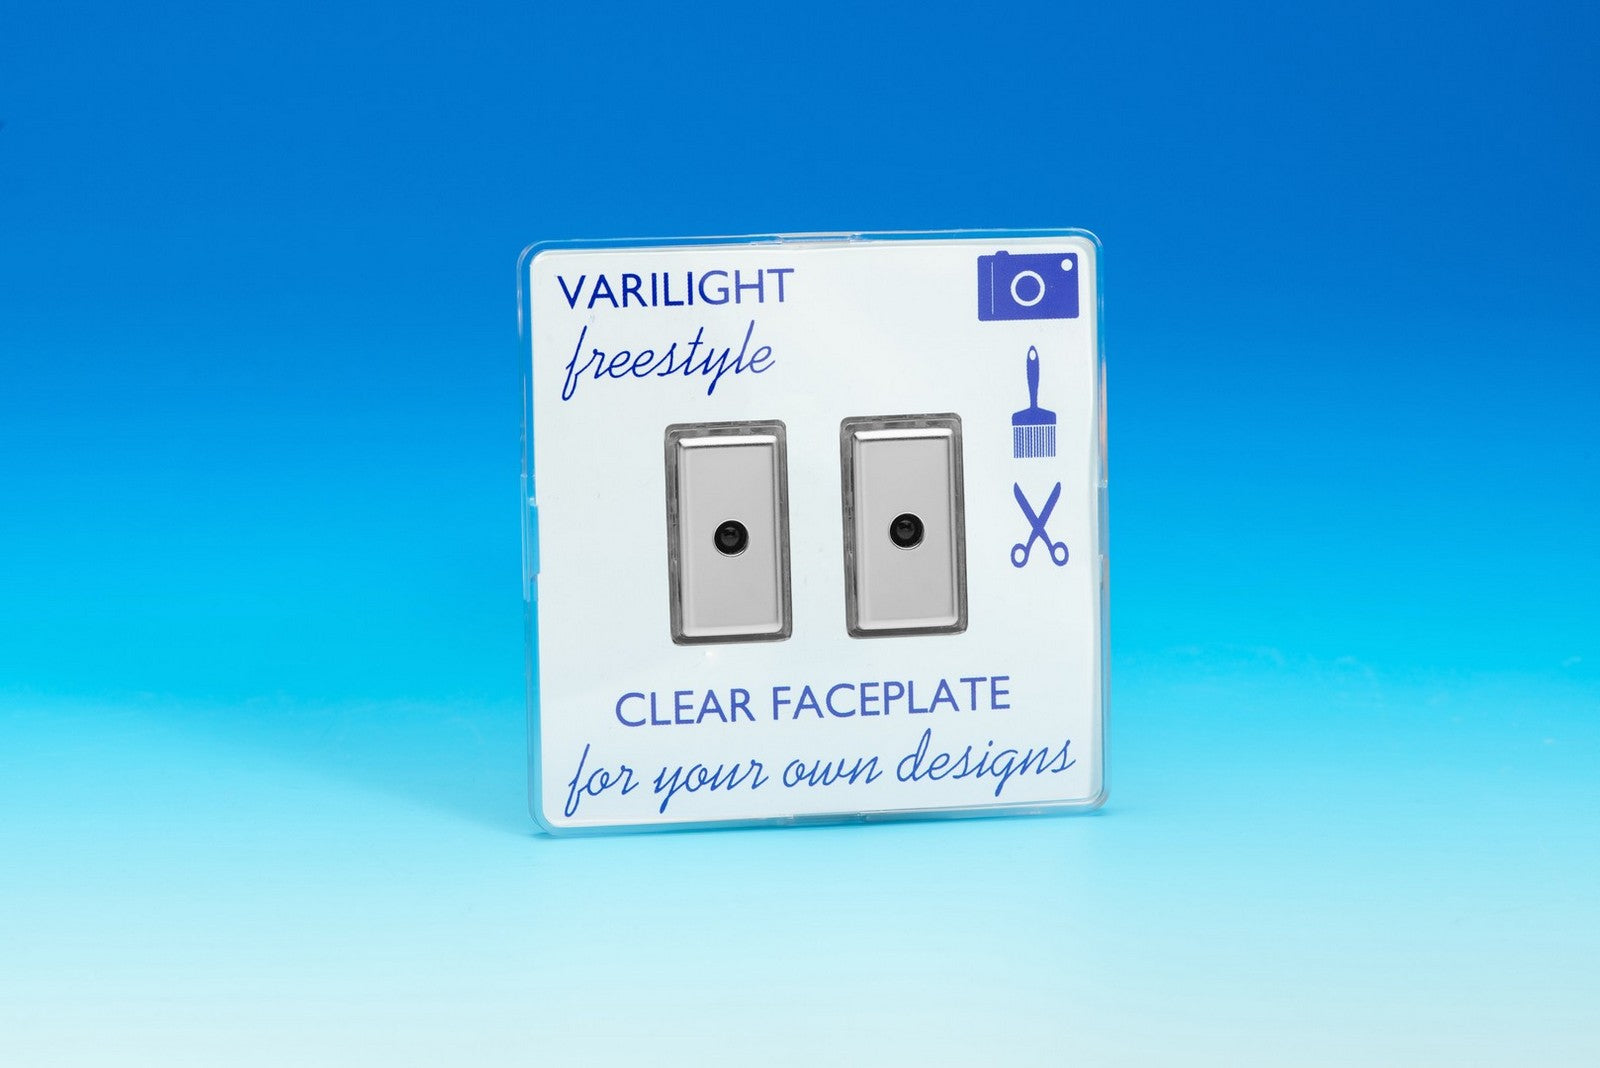 Varilight JIFE102C Freestyle Clear 2-Gang Multi-Way Remote/Tactile Touch Control Master LED Dimmer 2 x 0-100W (1-10 LEDs)